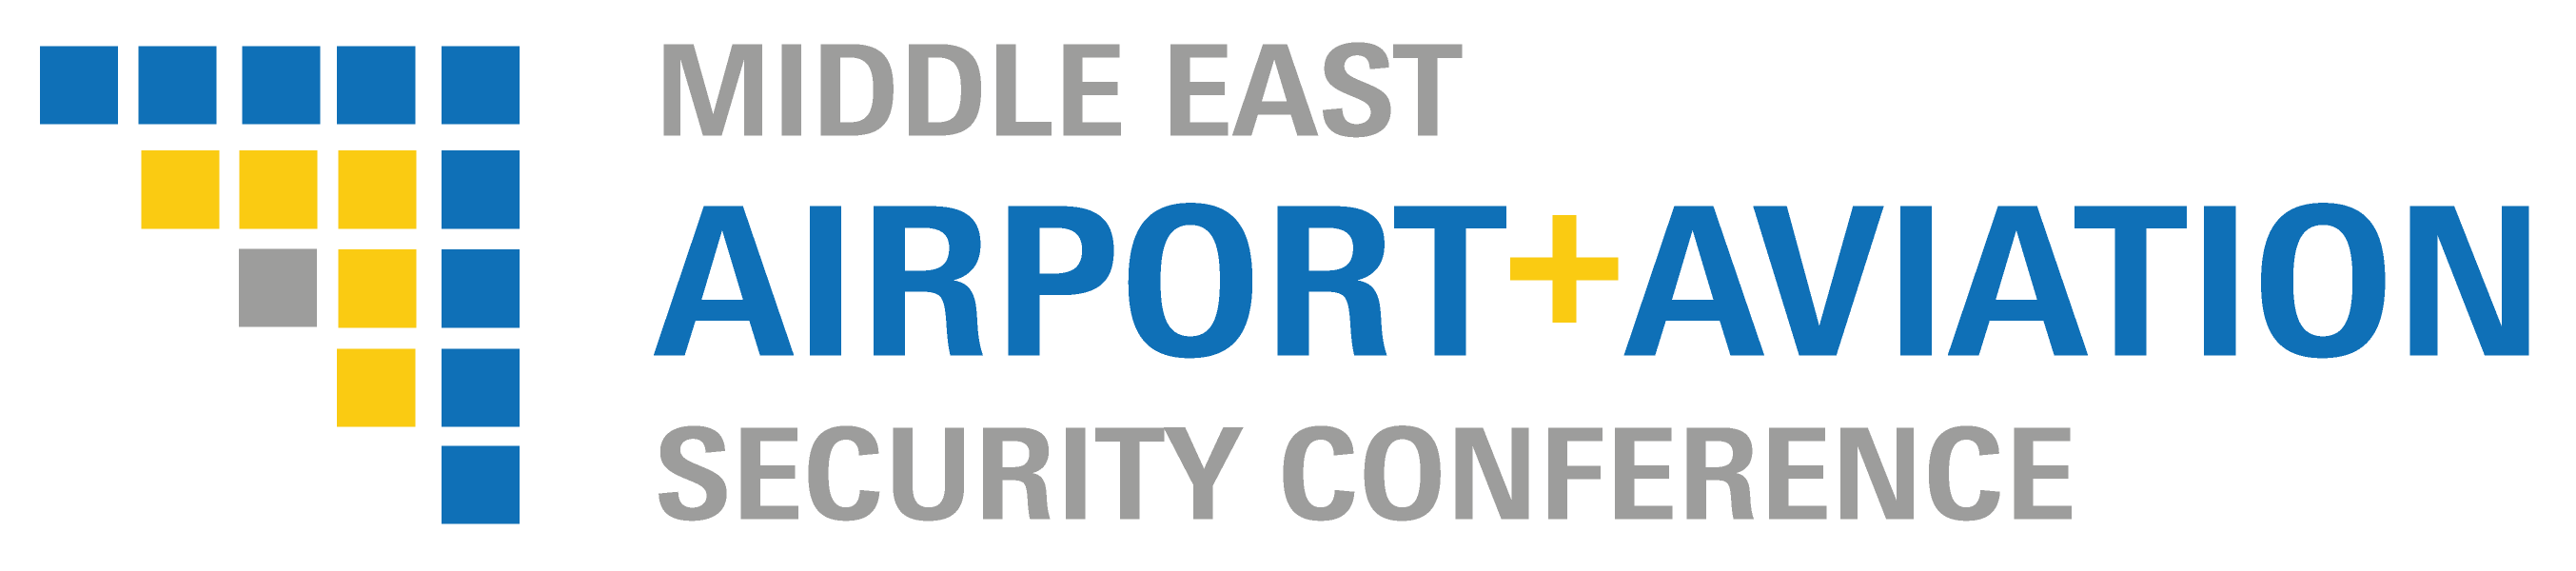 Middle East Airport and Aviation Security Conference